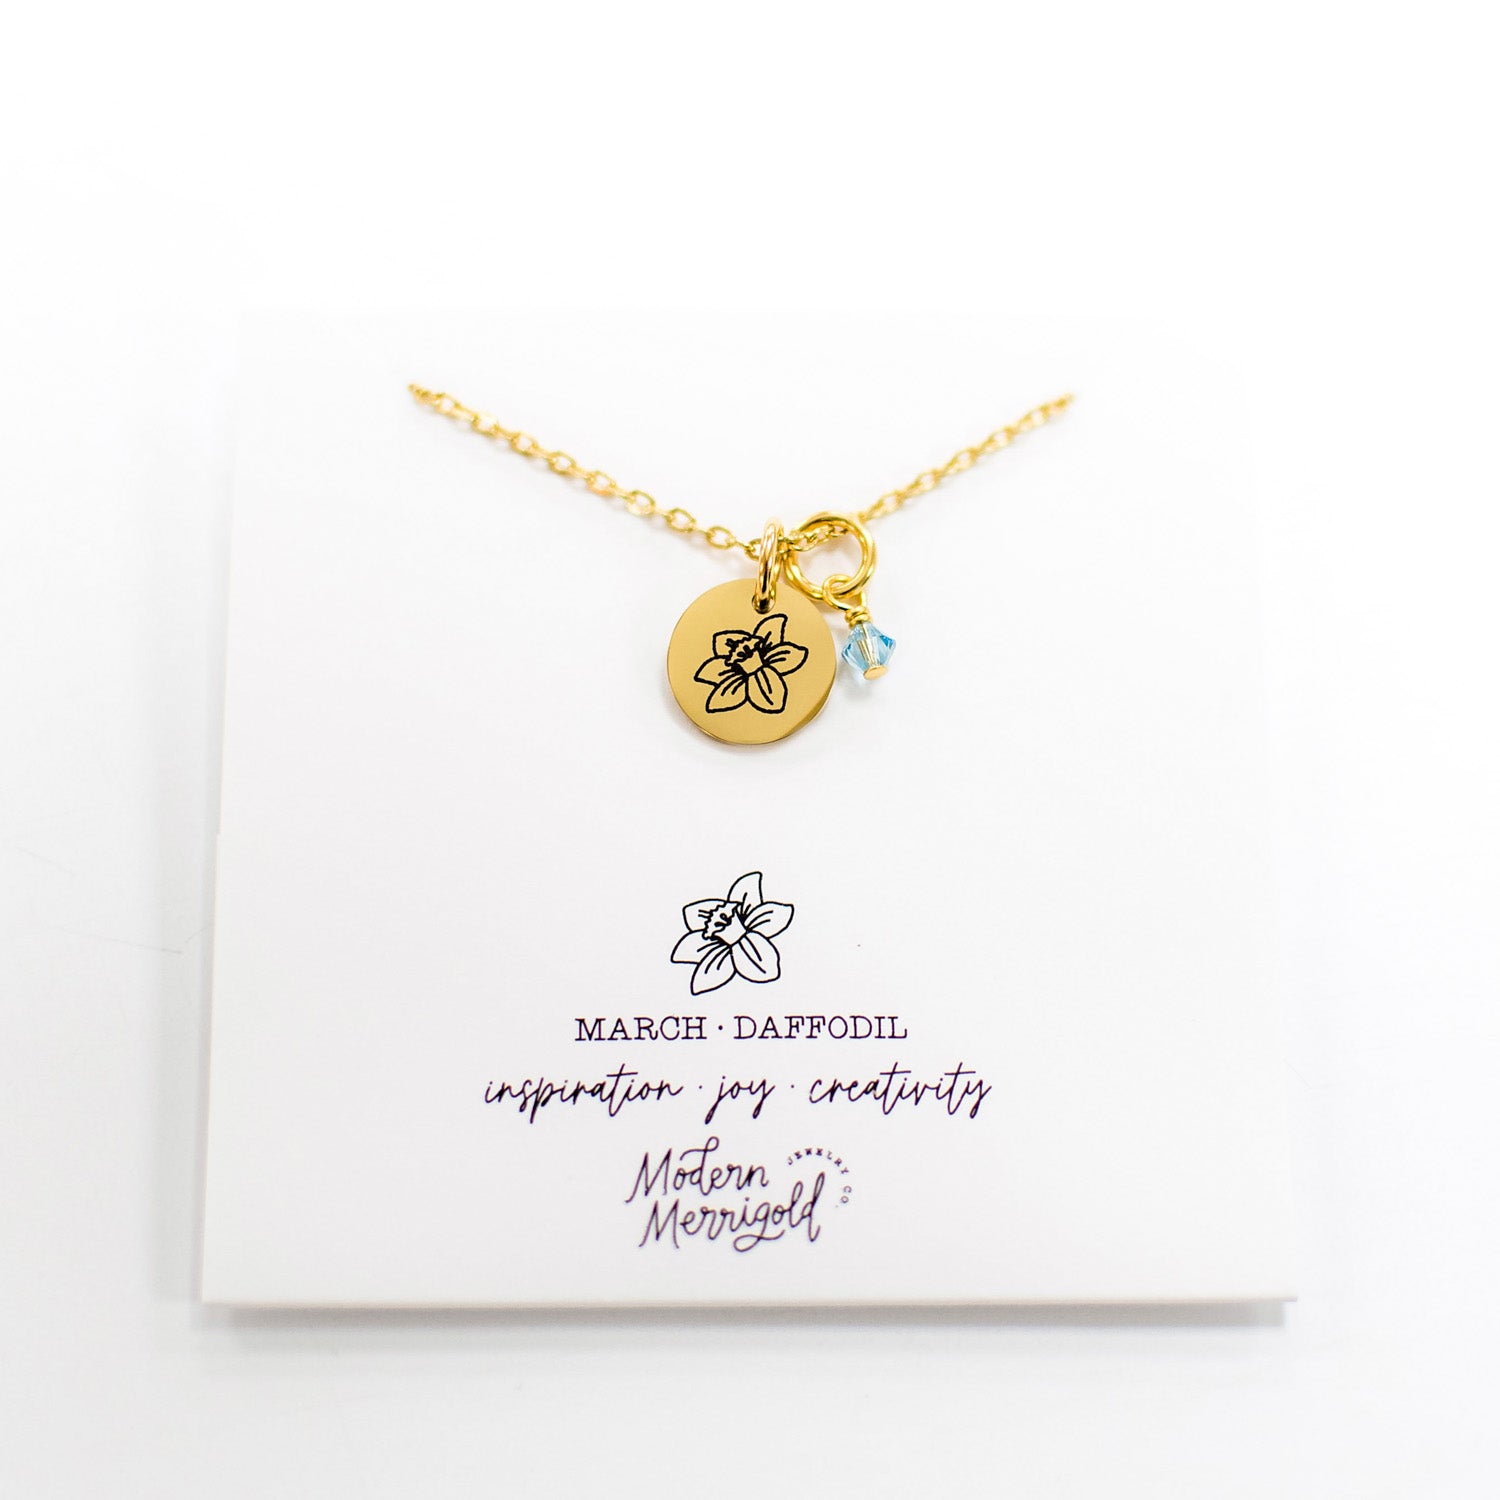 Birth Flower Jewelry] March - Forget-me-not Necklace (10K Yellow Gold –  TAKE-UP Jewelry